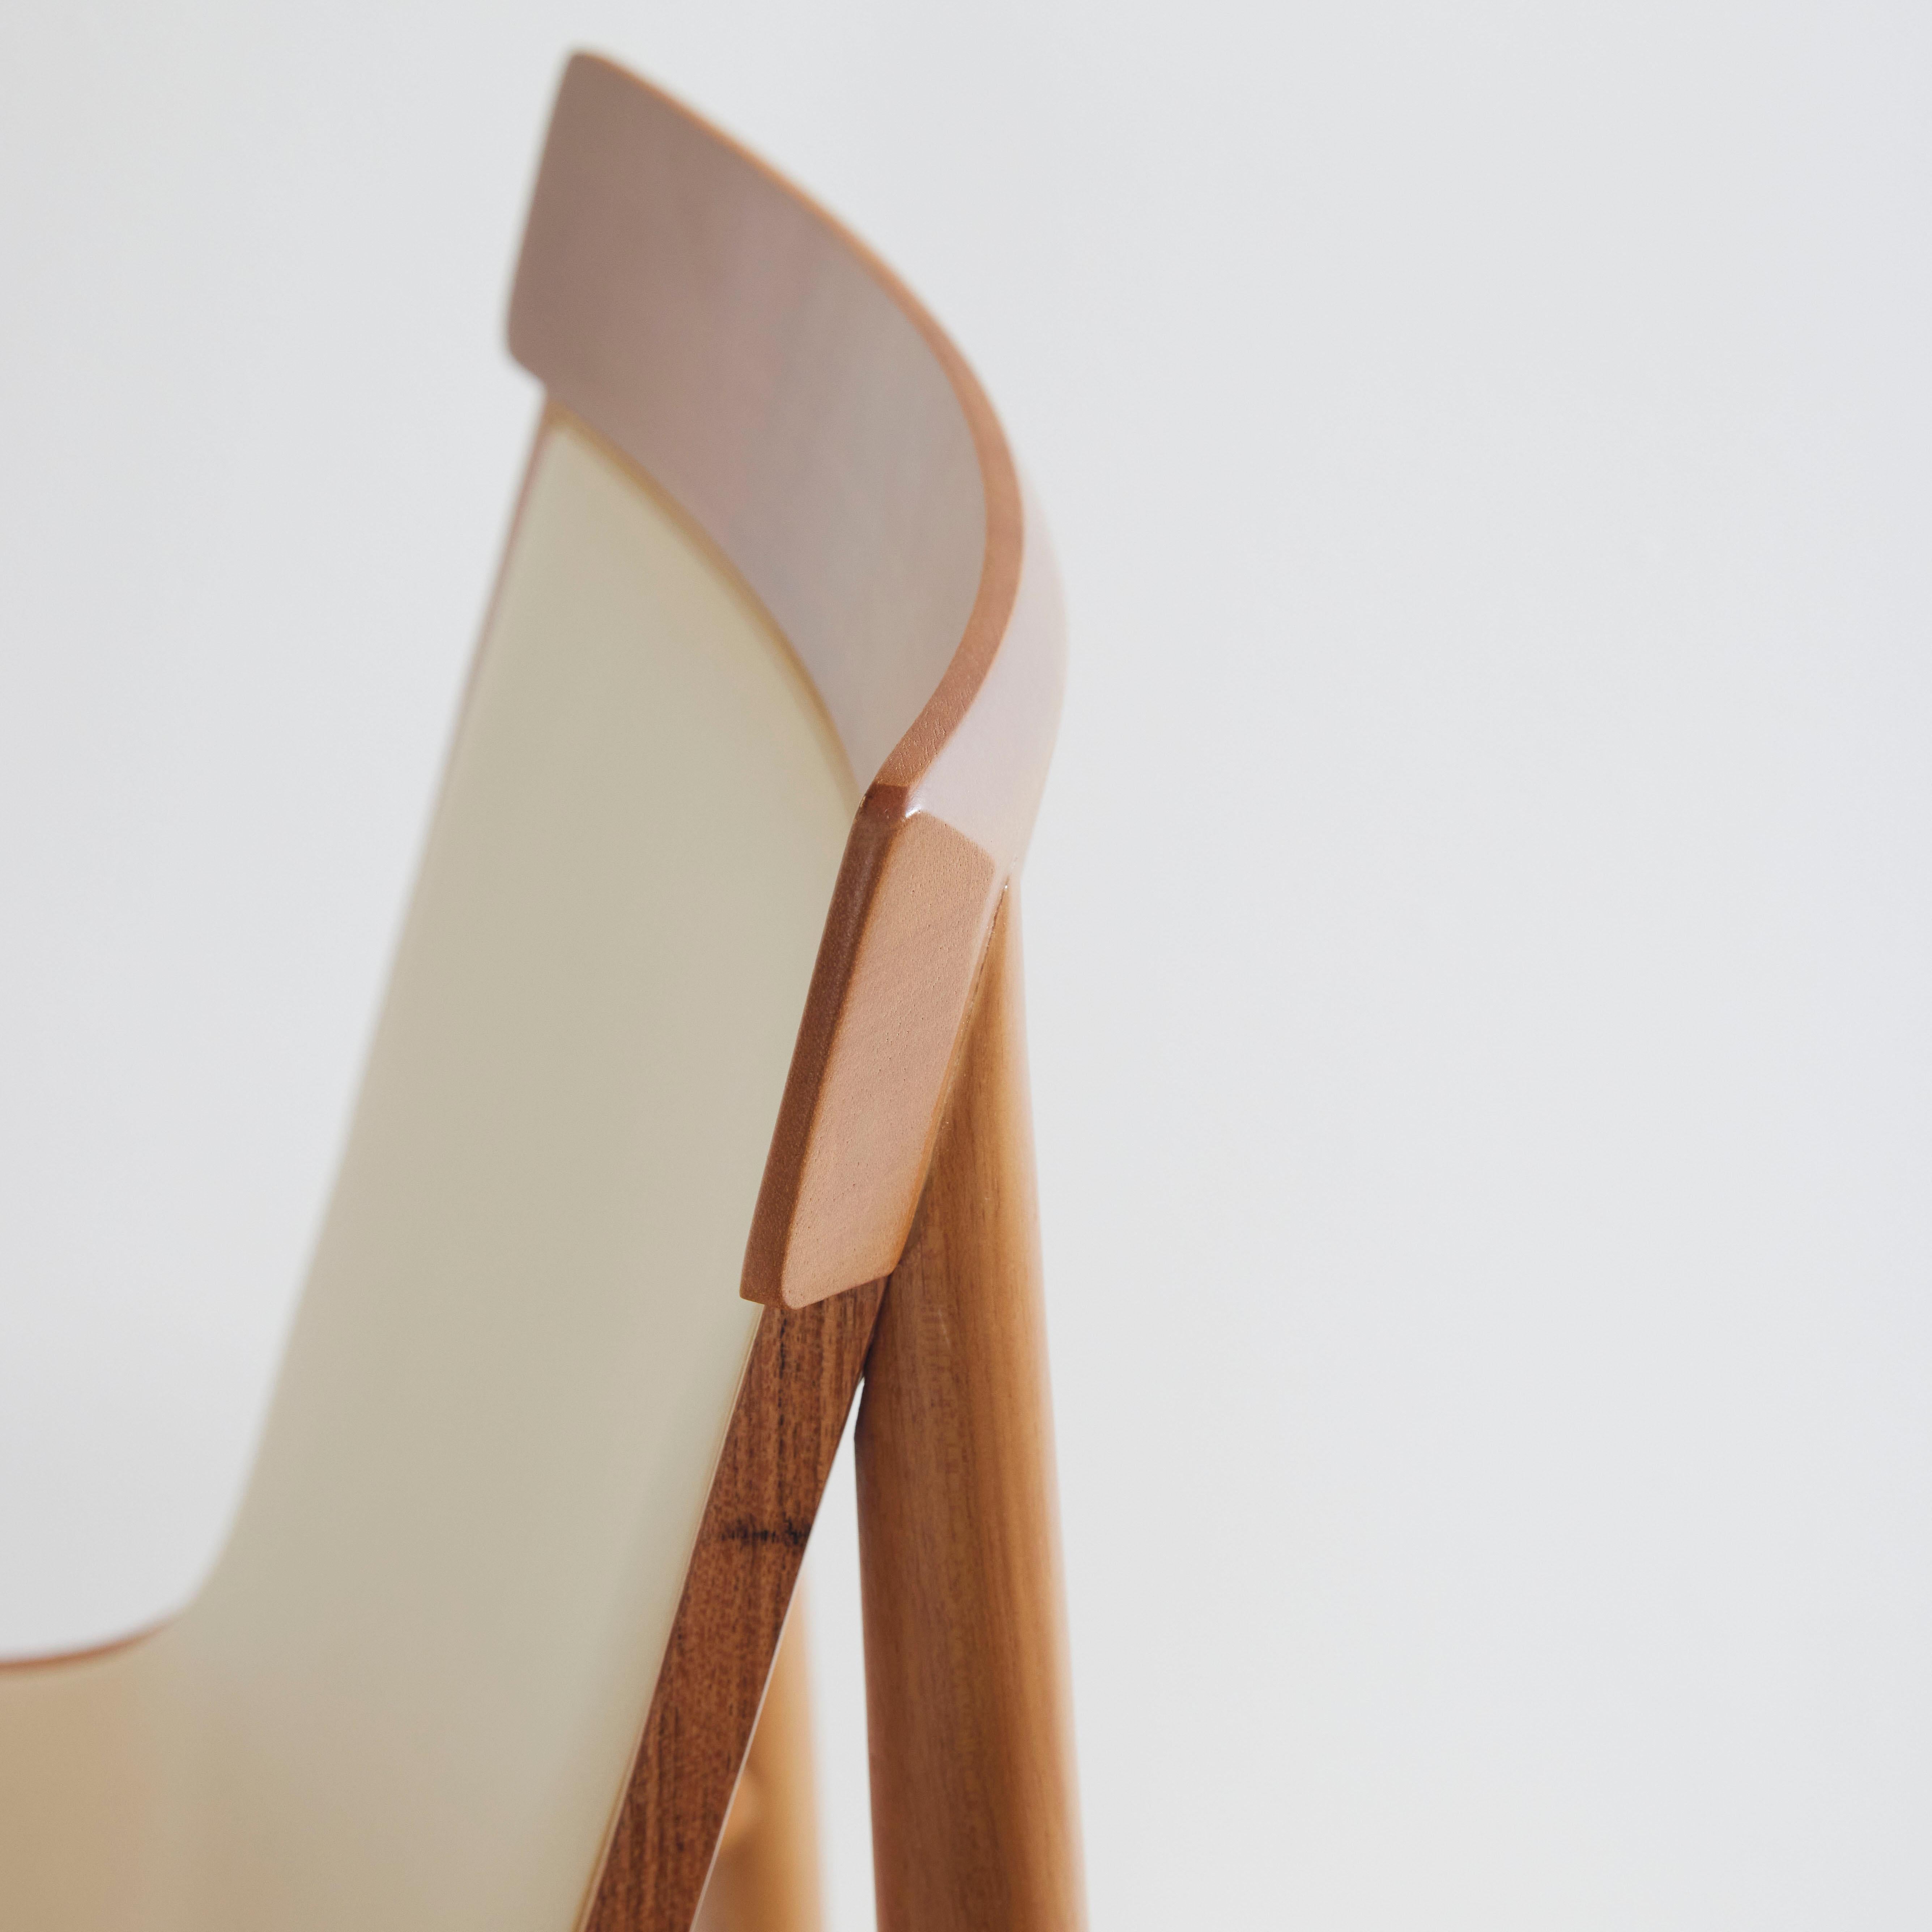 Contemporary Chair in Solid Wood, Upholstered in Leather or Textiles In New Condition For Sale In Vila Cordeiro, São Paulo